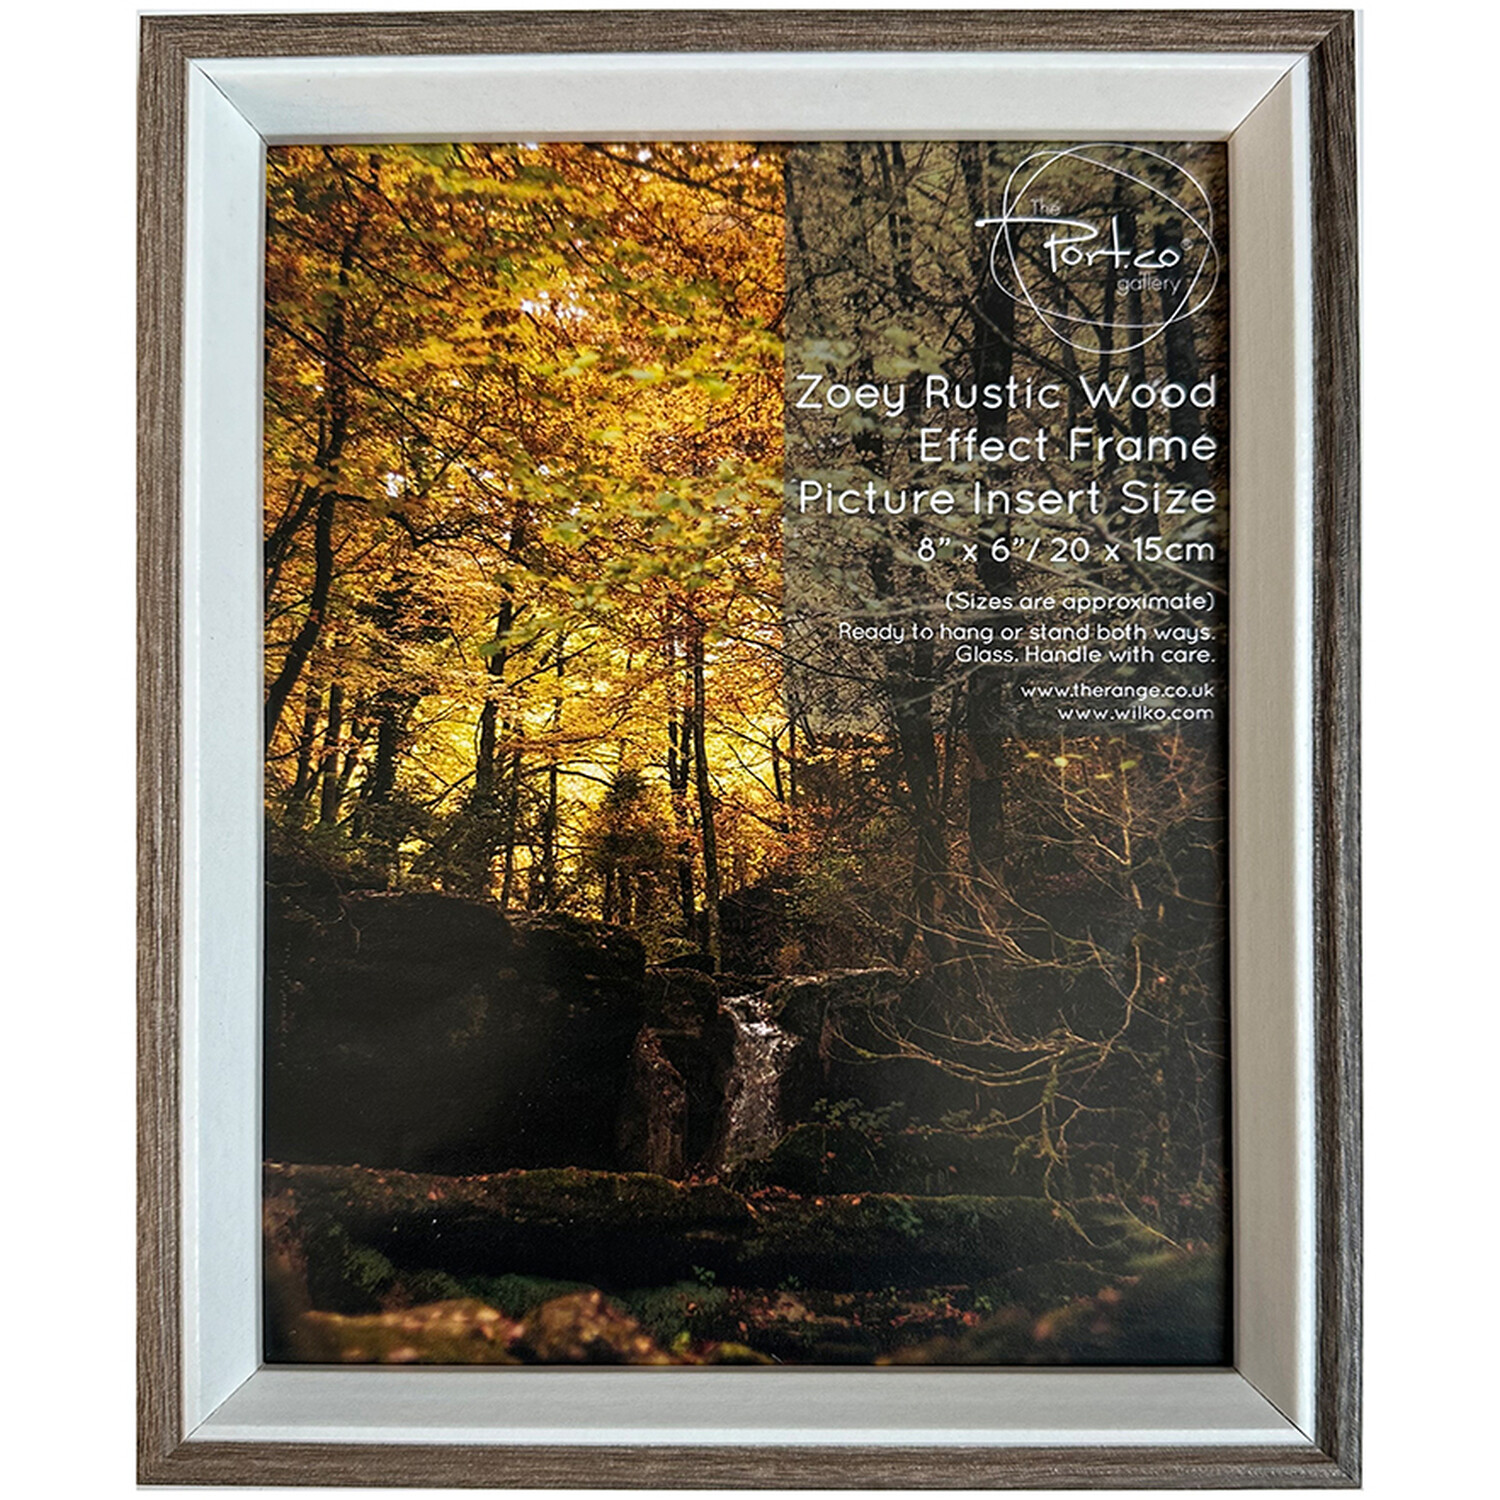 Zoey Rustic Wood Effect Frame - Brown / 8x6in Image 1